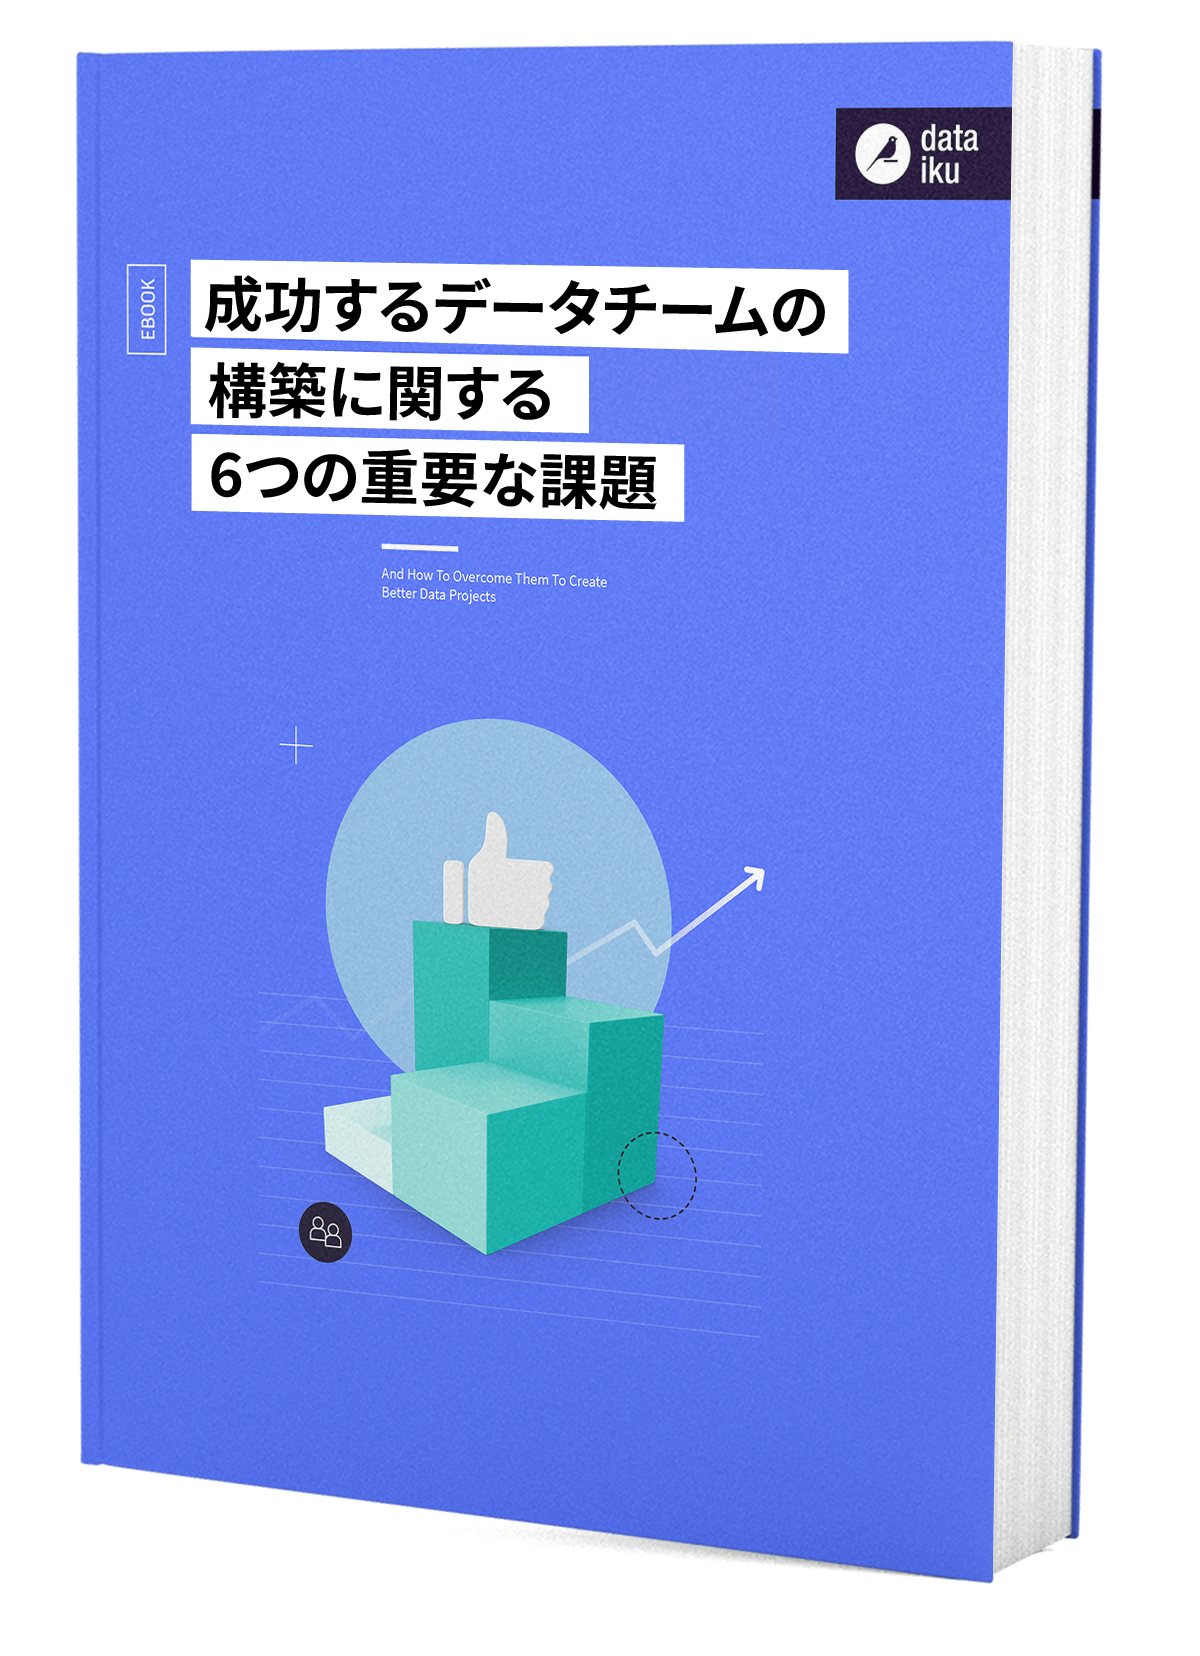 3D Ebook 6 Challenges to Building a Successful Data Team JP